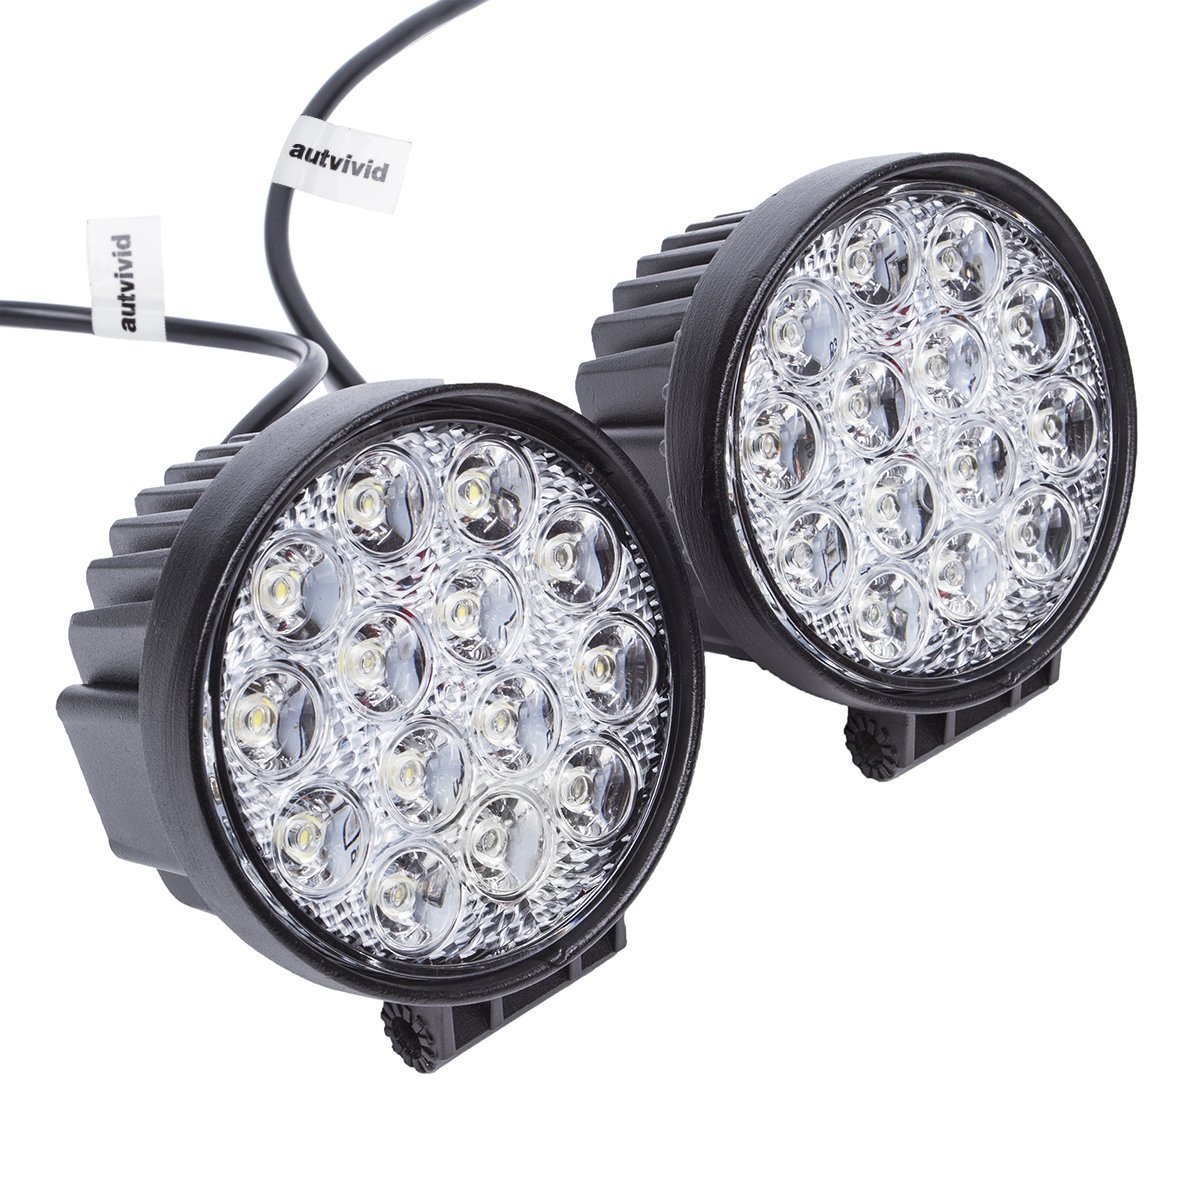 External Lights Dual 27W Heavy Duty Flood Lights For Outdoors and Emergency Lighting